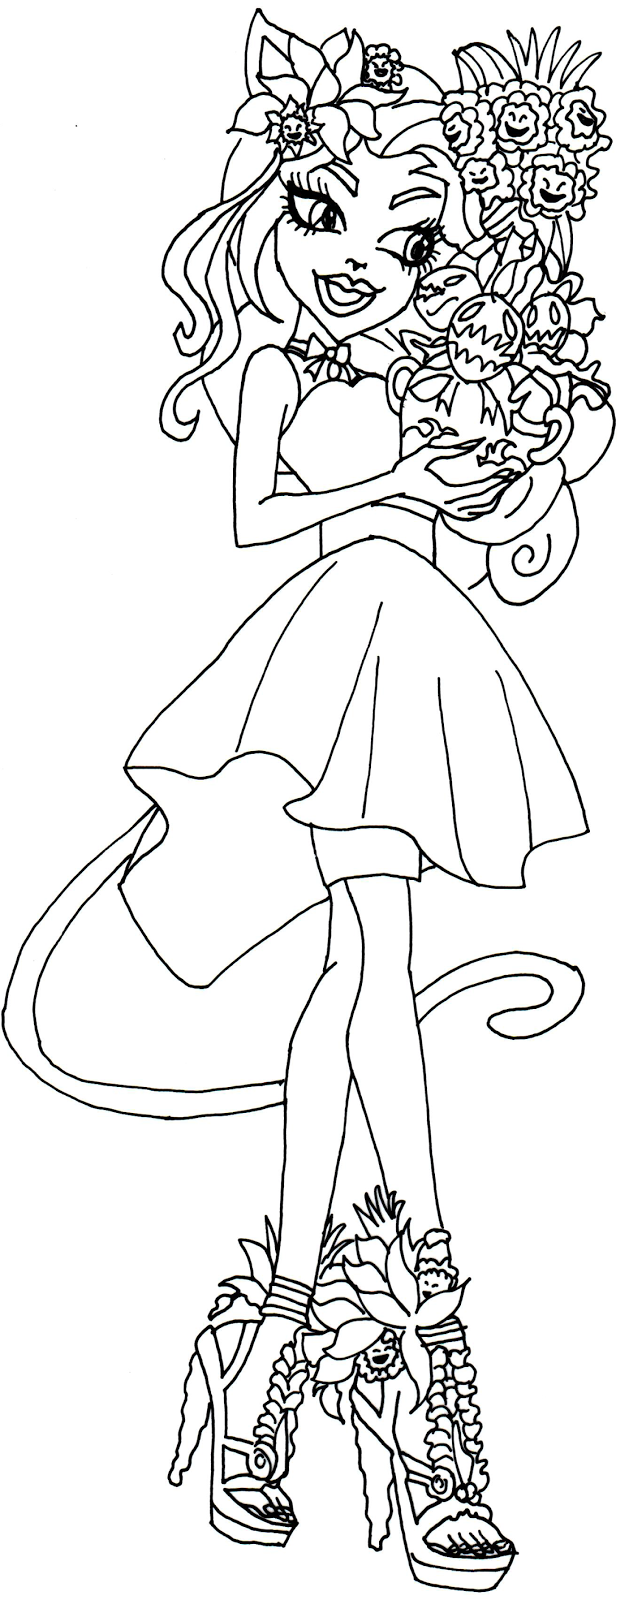 Download Free Printable Monster High Coloring Pages: Catrine De Mew ...